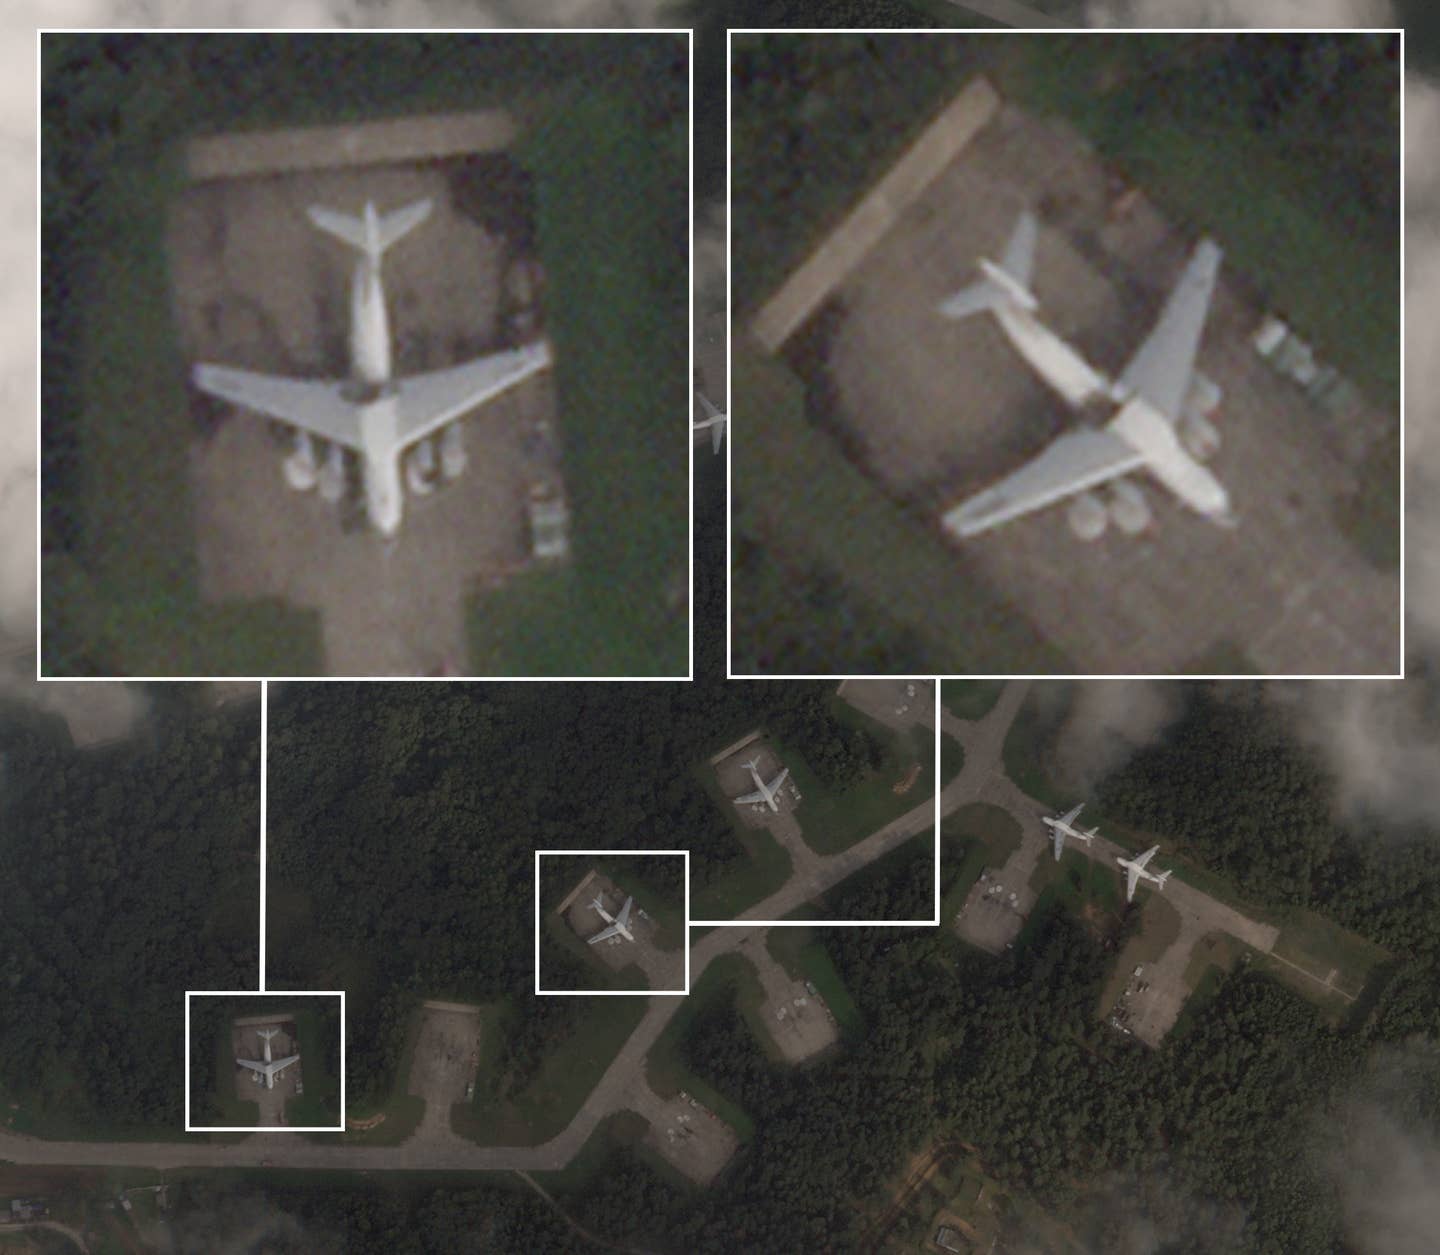 Two Russian IL-76 Candid transport jets show damage where the wings meet the fuselage during a Ukrainian drone attack on Kresty Air Base in Pskov, Russia. This is the image taken earlier this morning that had cloud cover obscuring much of the base.  <em>PHOTO © 2023 PLANET LABS INC. ALL RIGHTS RESERVED. REPRINTED BY PERMISSION</em>